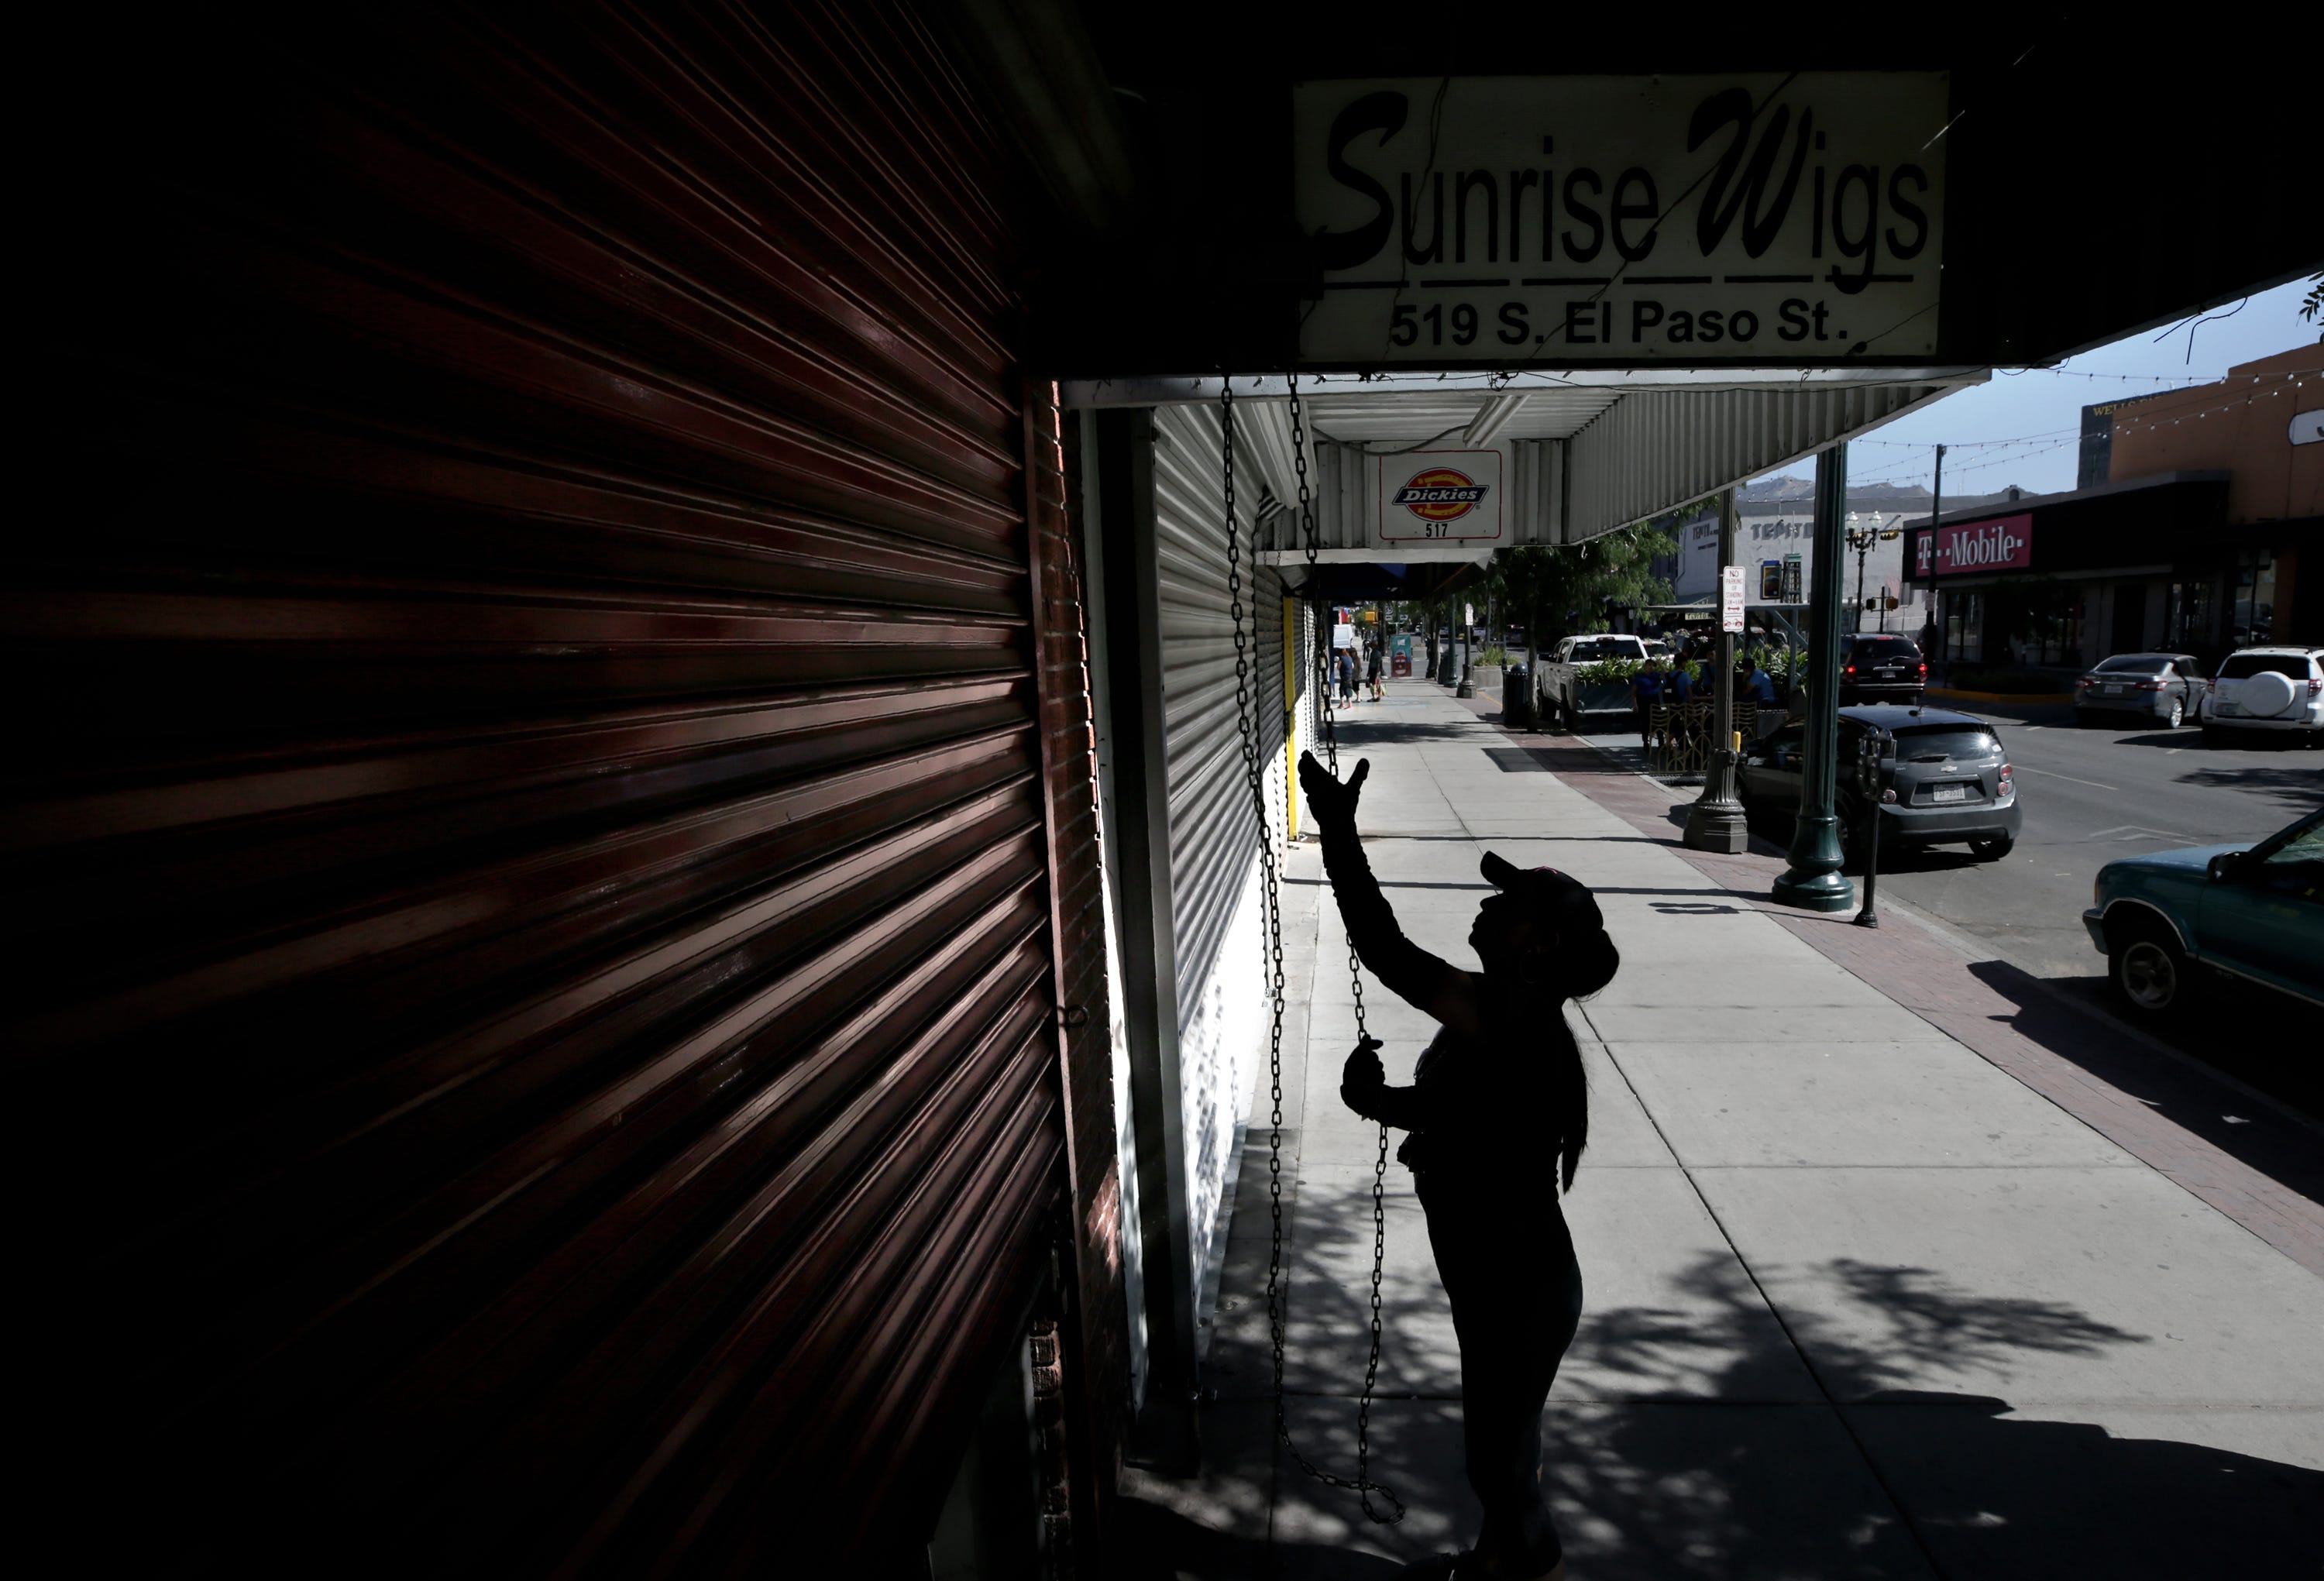 EL PASO, Texas – Elsa Arrambide, co-owner of Sunrise Wigs in downtown El Paso, opens her shop Sunday morning on a popular shopping street for border crossers. Arrambide says business is way down as long lines have become the norm on the Paso del Norte International Bridge only a few block south.